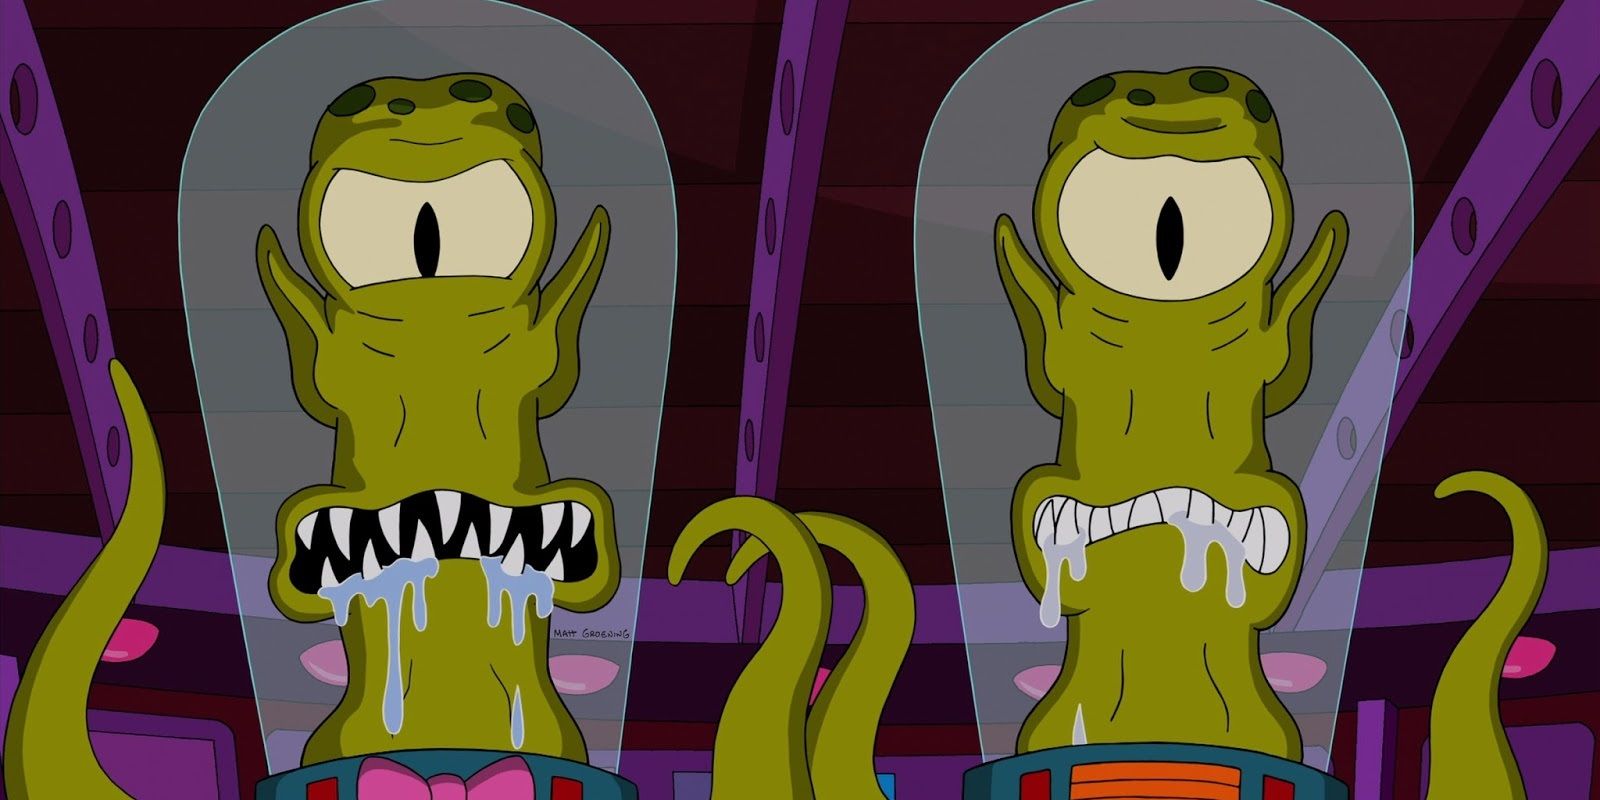 Kang and Kodos in The Simpsons